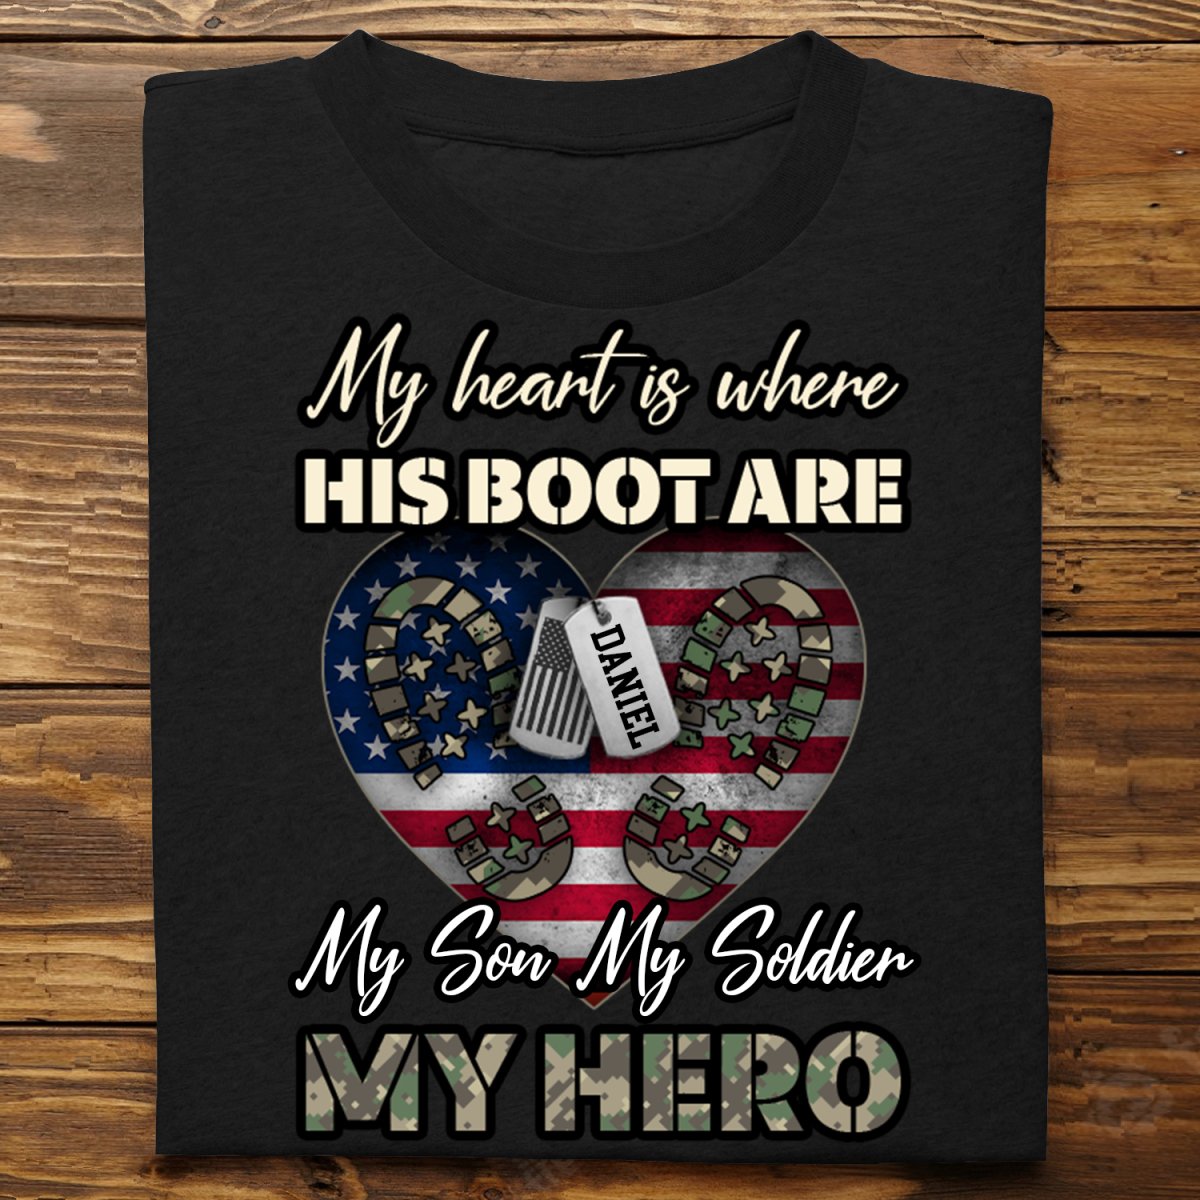 Discover Family - My Heart Is Where His Boots Are, My Son My Soldier My Hero - Personalized T-Shirt